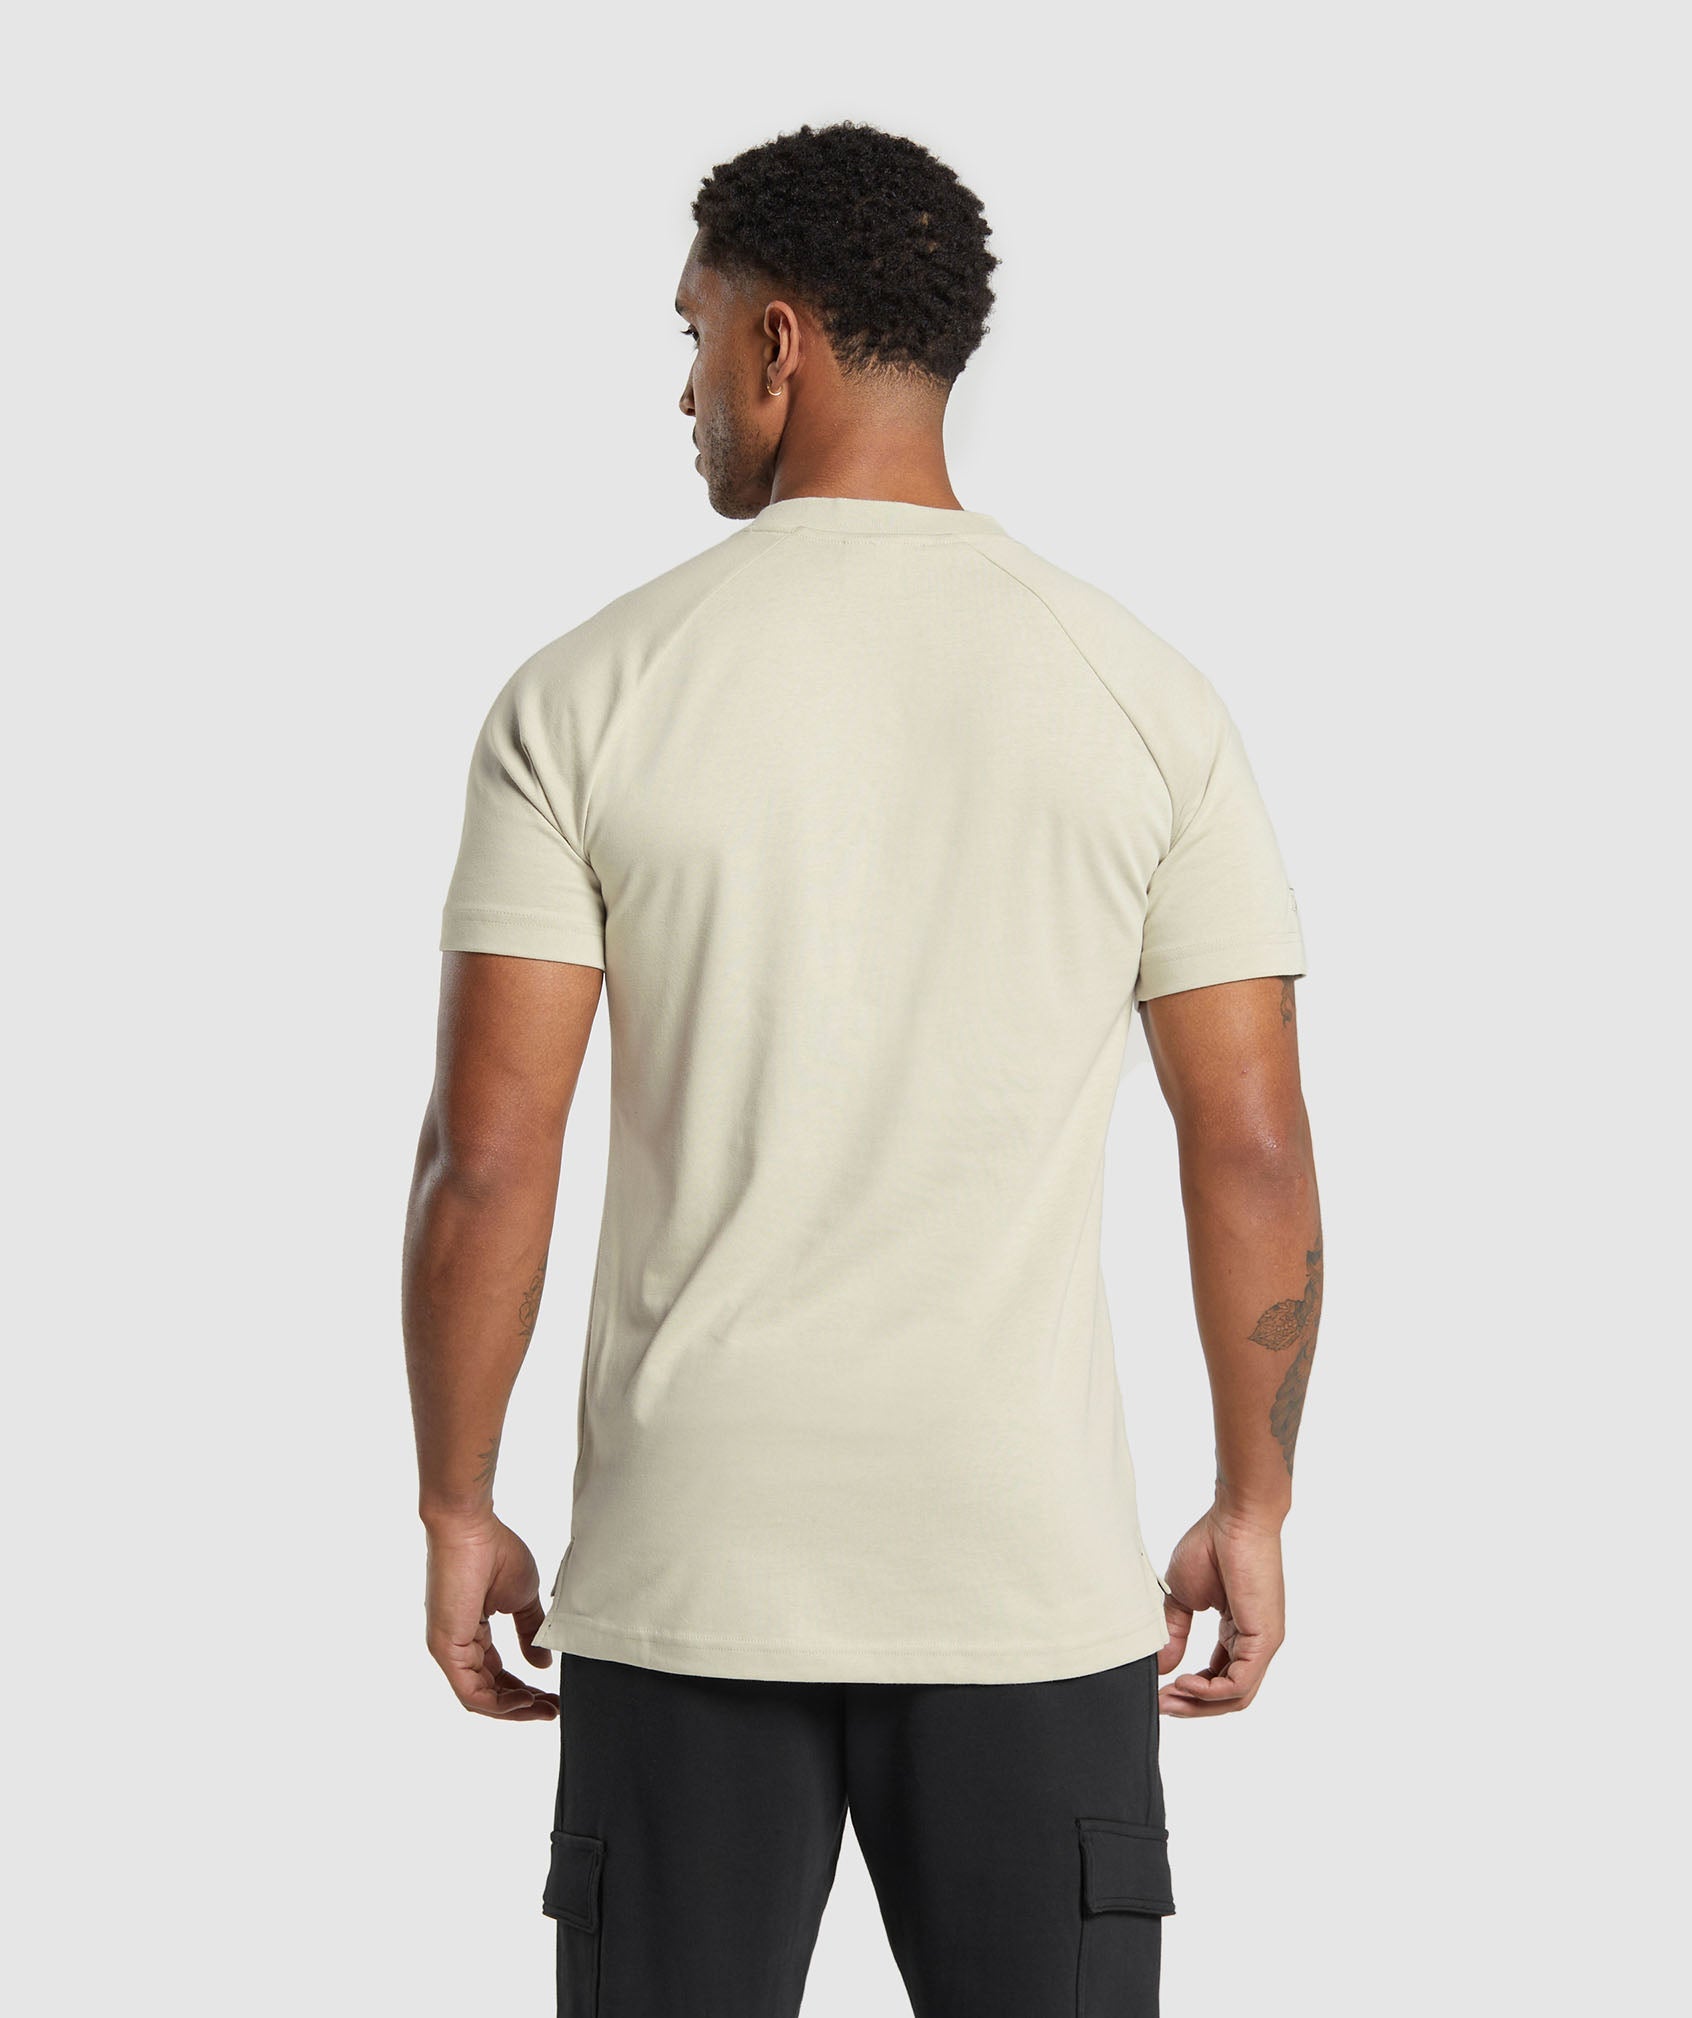 Rest Day Commute Polo Shirt in Pebble Grey - view 2